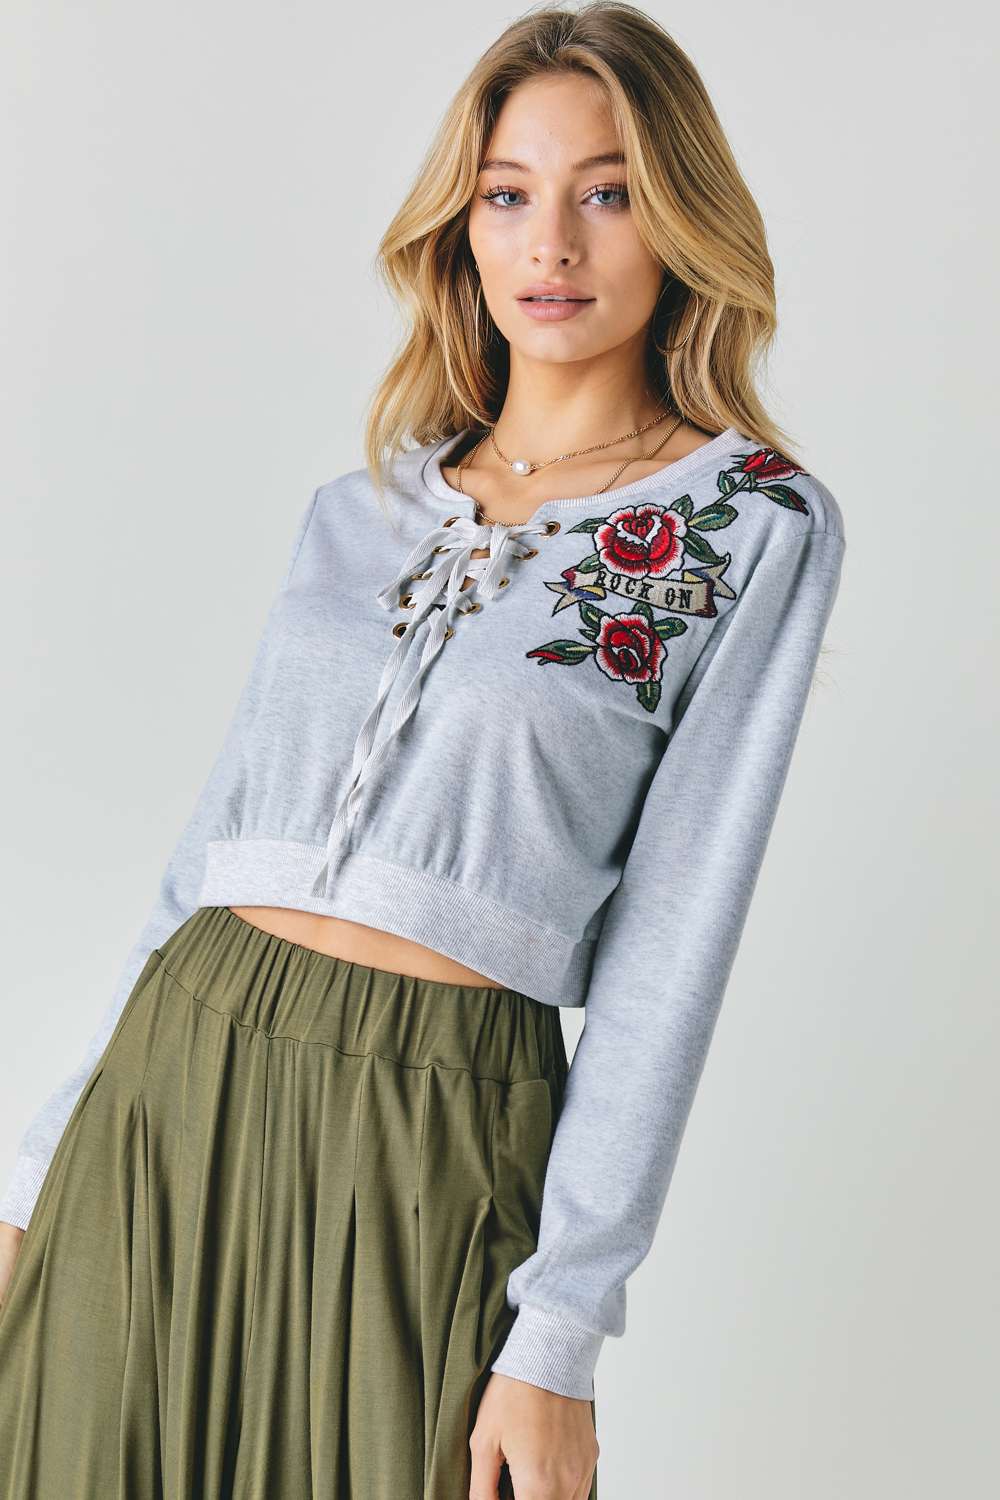 Floral Embroidered Cropped Sweatshirt - Fashion Quality Boutik